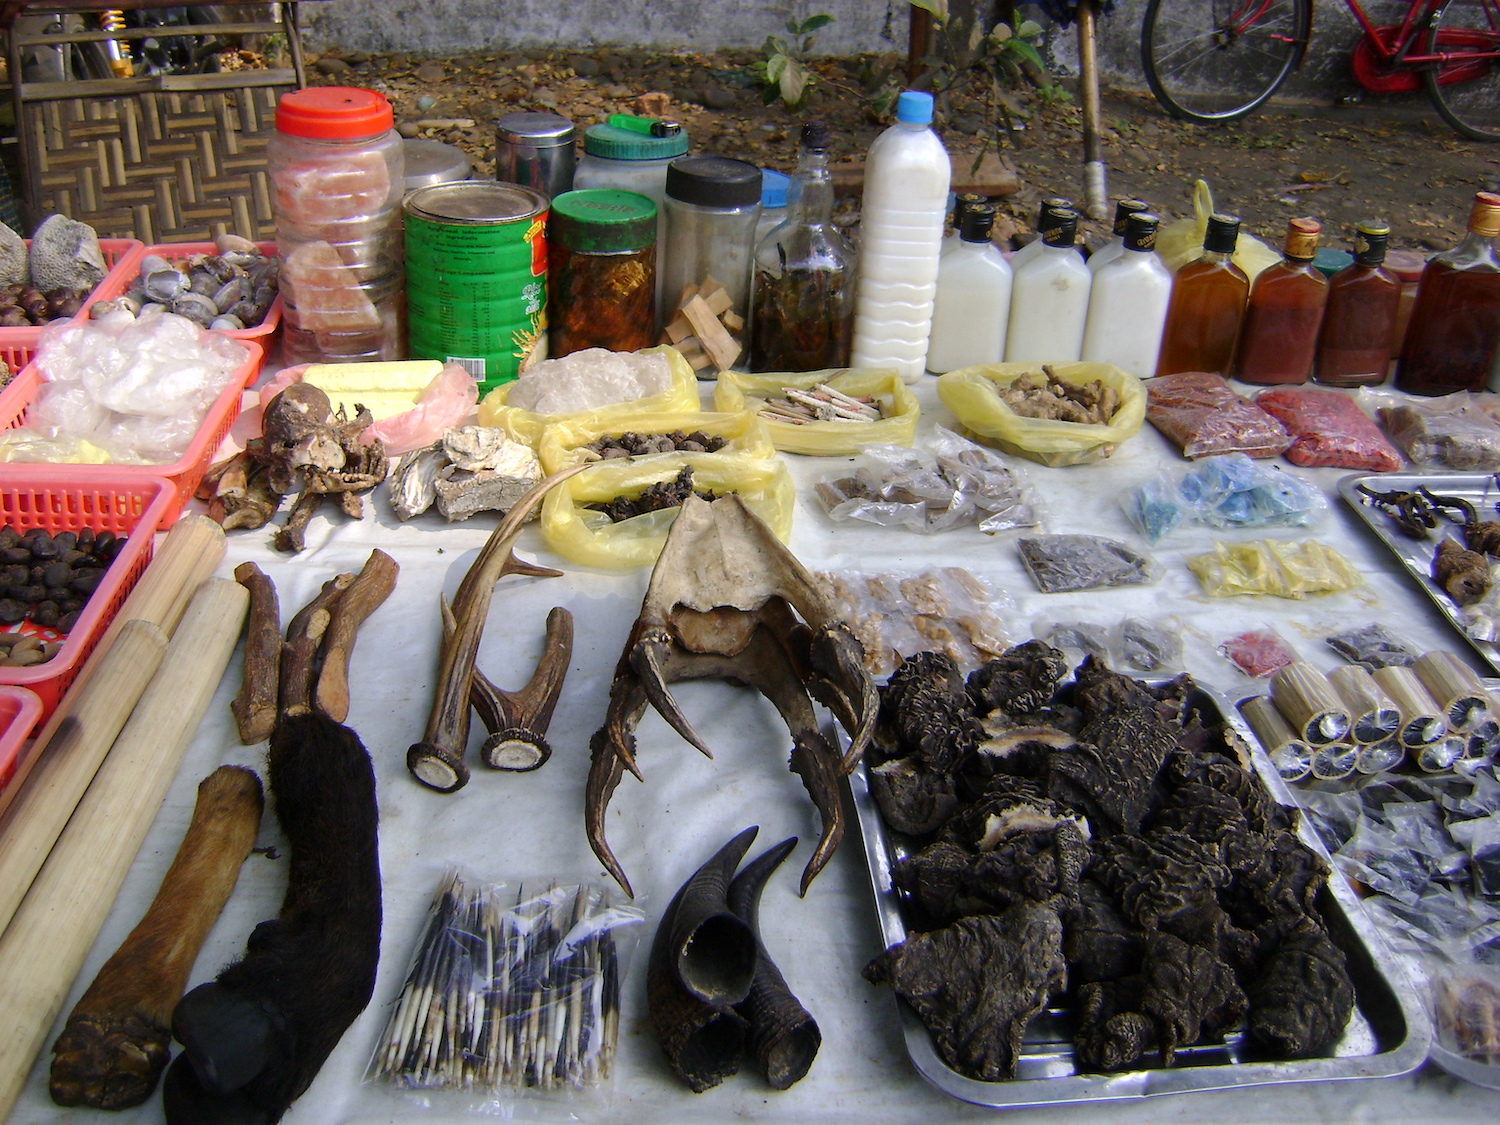 Elephant skins, porcupine quills, red muntjac skulls, red serow horns and other wildlife products on display at a market in Myitkyina in 2009. (Sapai Min)